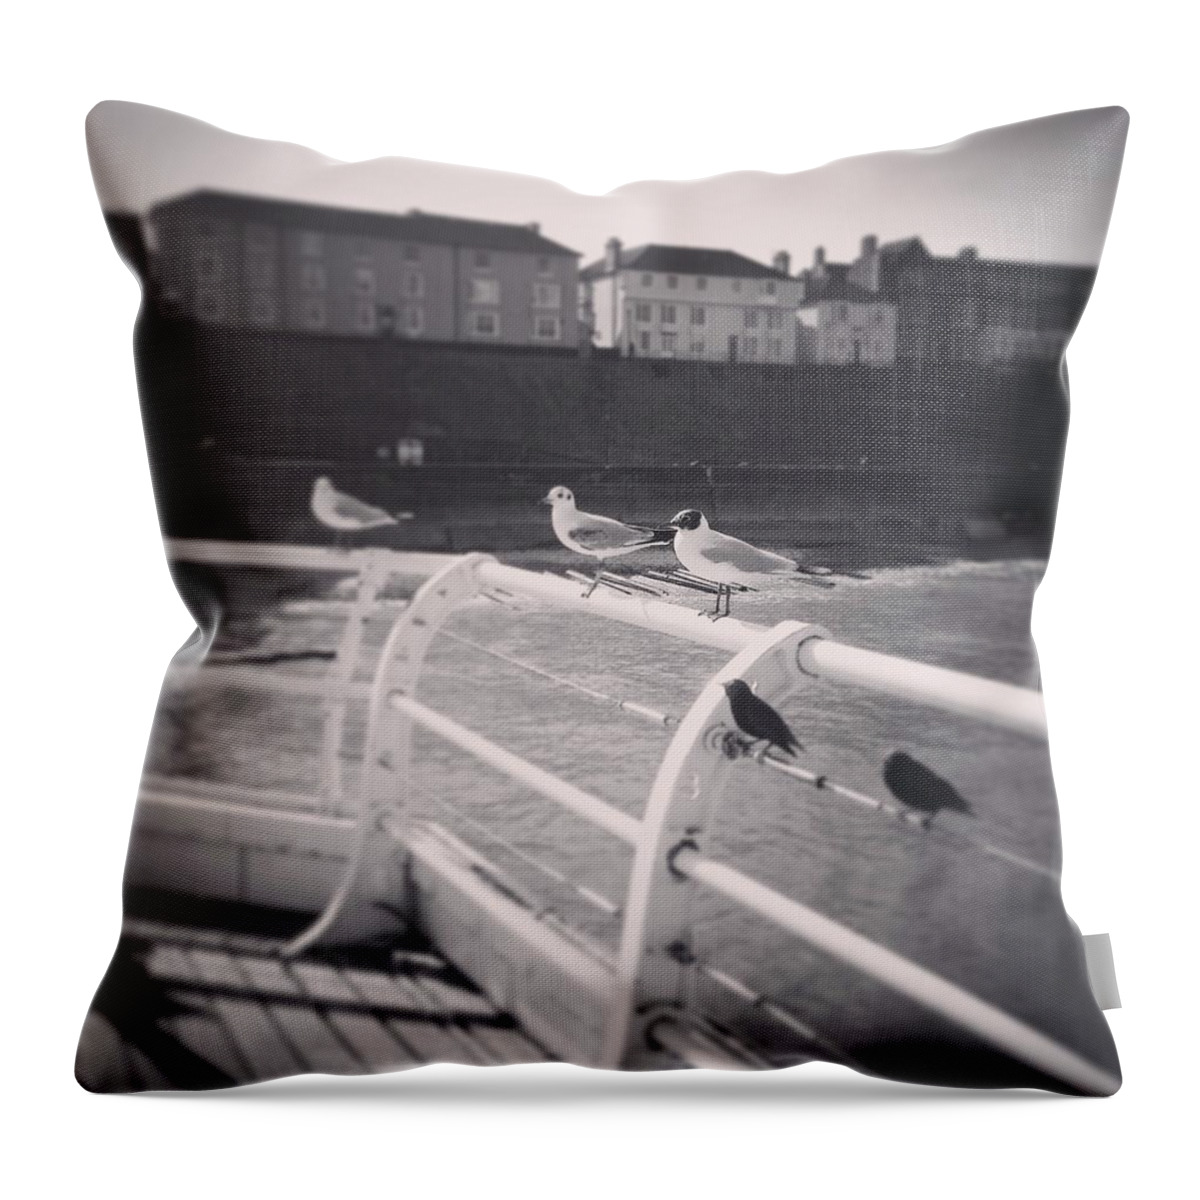 Seagulls Starlings Fish And Chips Cromer Norfolk Beach Pier Promenade Throw Pillow featuring the photograph Seagulls of the East Coast Cromer Norfolk England by Crystal Money